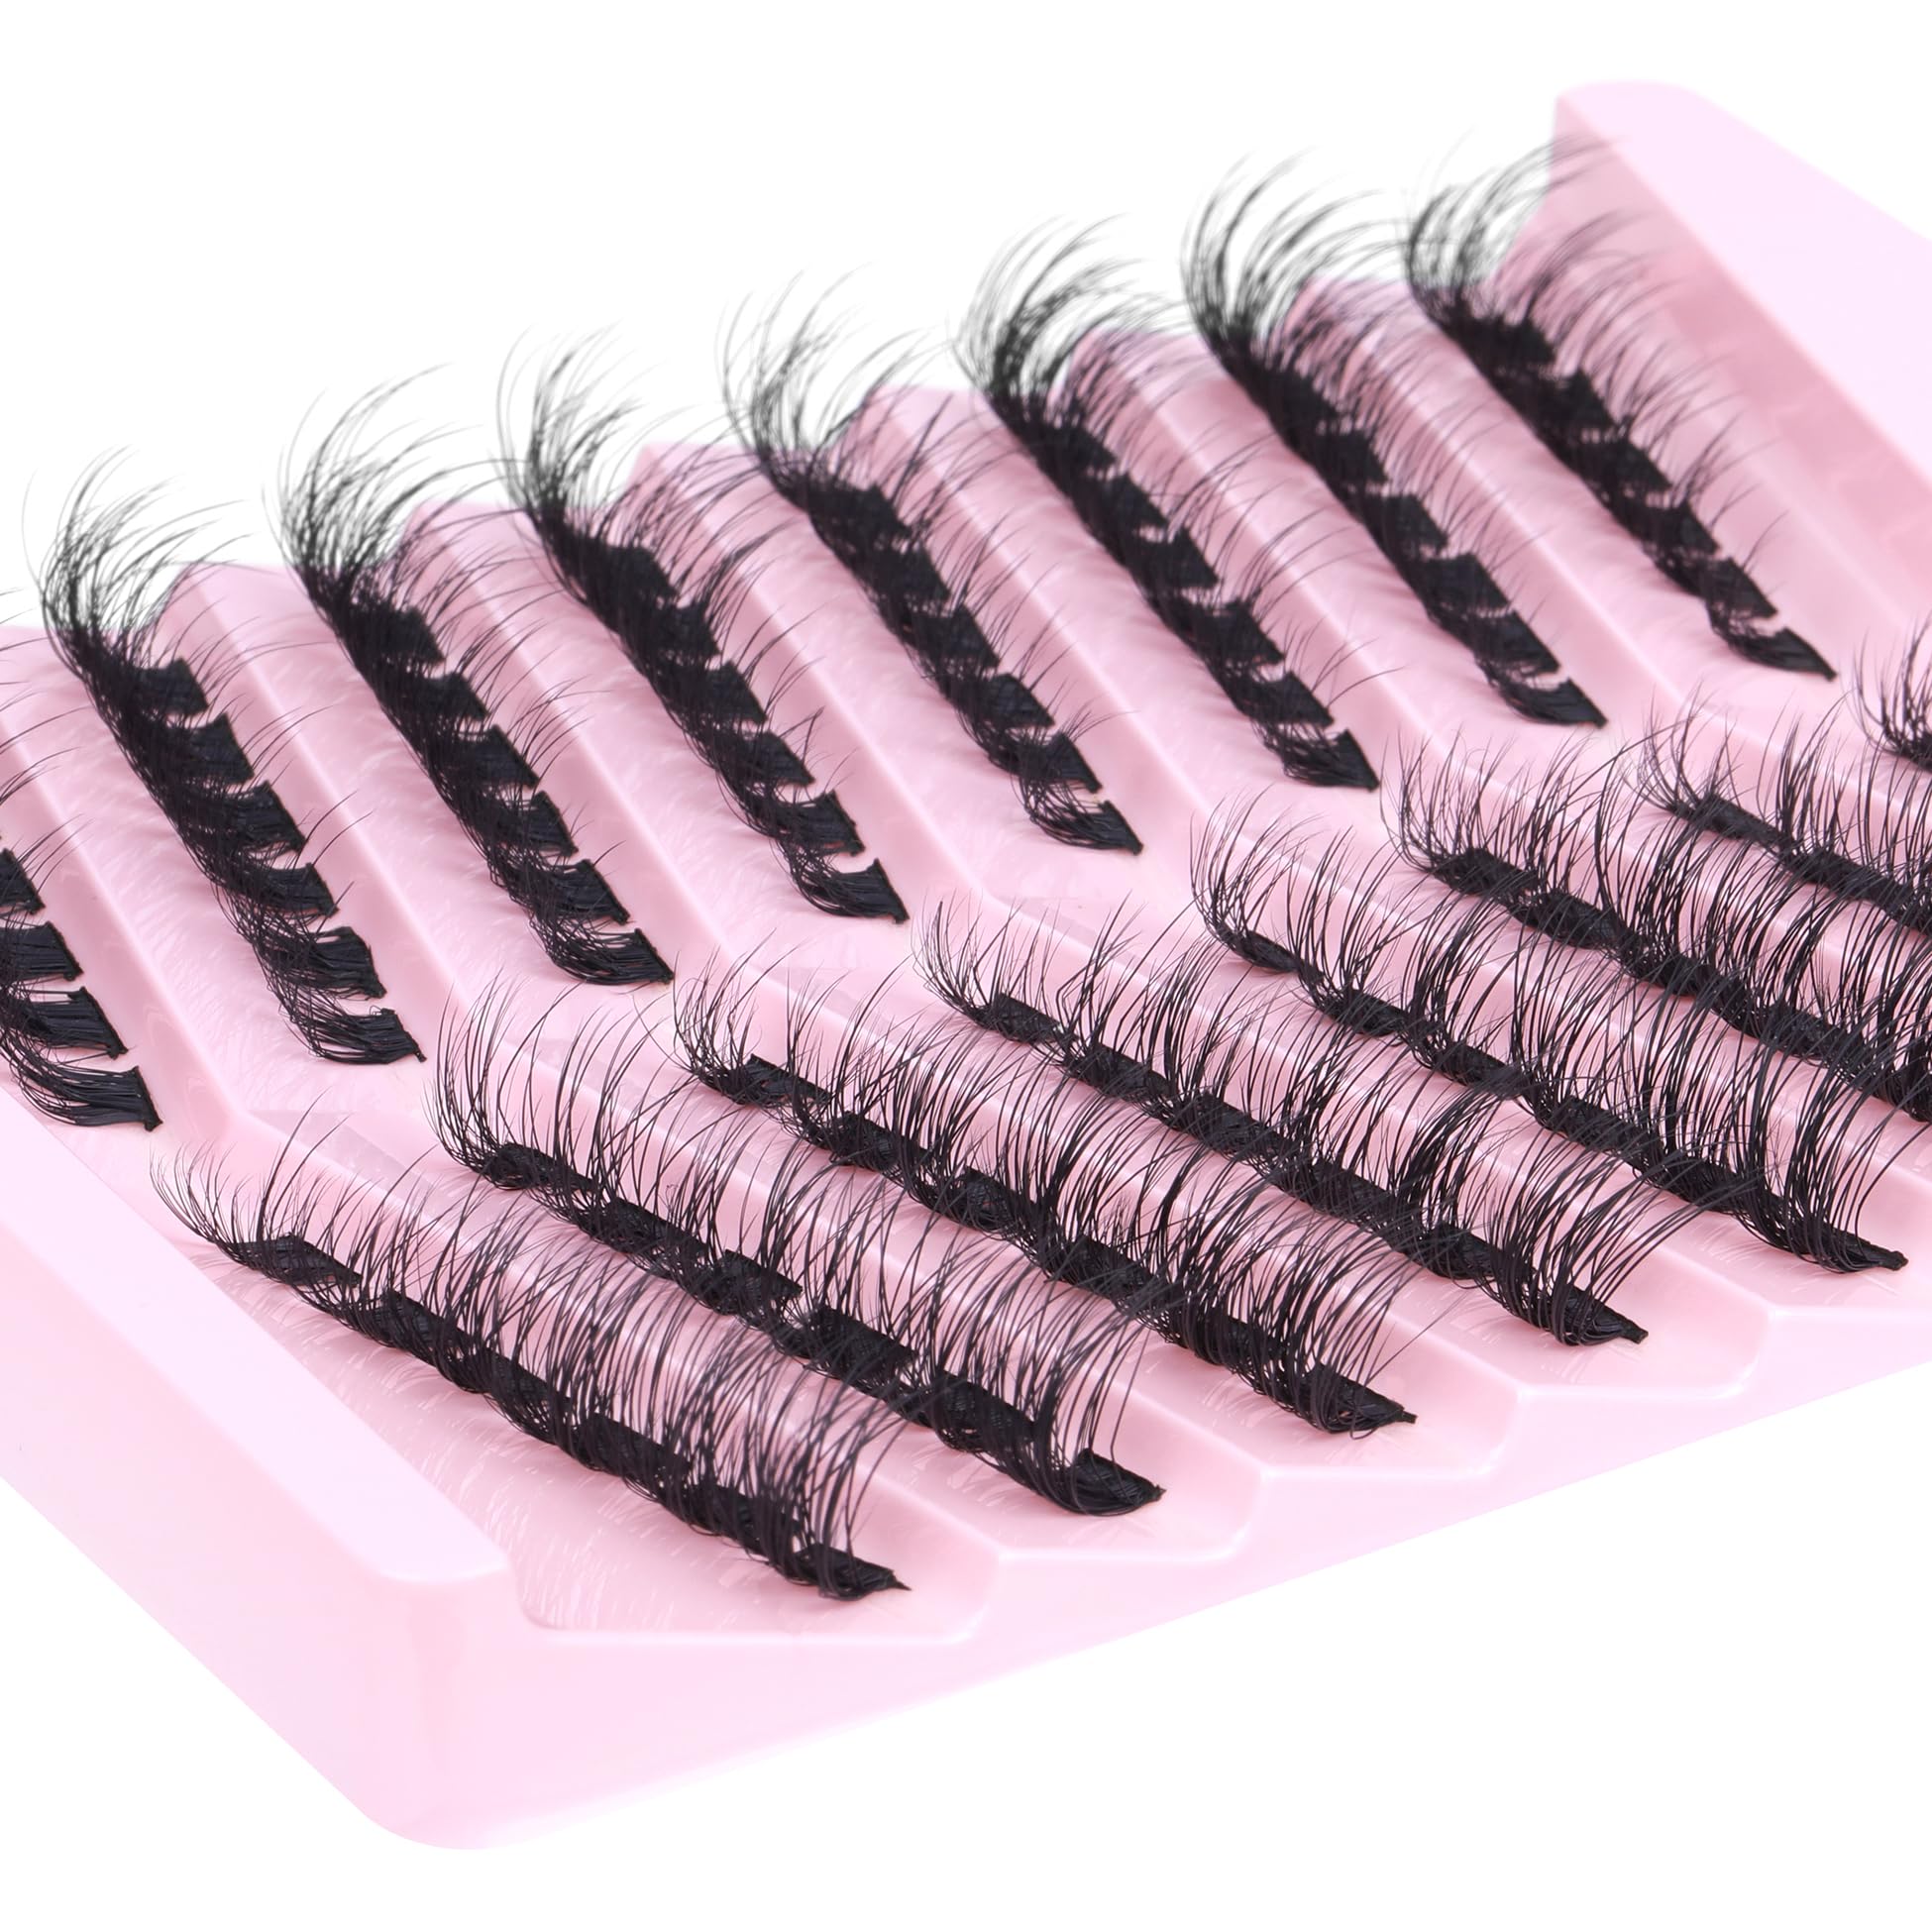 DIY Lash Extension Kit Fluffy Flat Lash Clusters with Kit Lash Bond and Seal and Cluster Eyelashes Applicator Tool D Curl Eyelash Extension Kit Individual Lashes Cluster by FANXITON